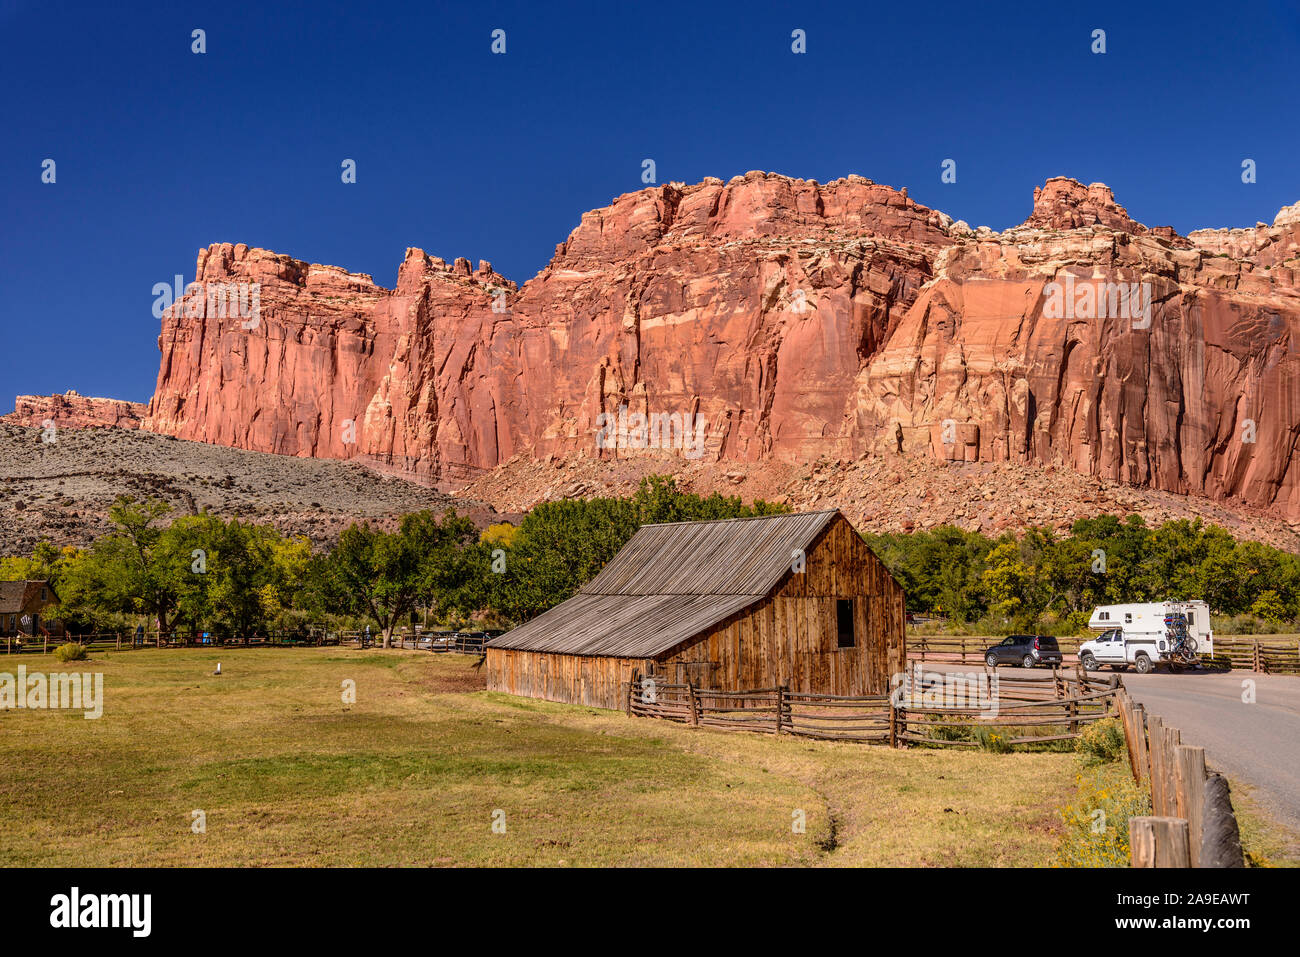 The USA, Utah, Wayne County, Torrey, Capitol Reef Nationwide park, Fremont River Valley, Fruita Historic District, Gifford Homestead with Fruita Cliff Stock Photo